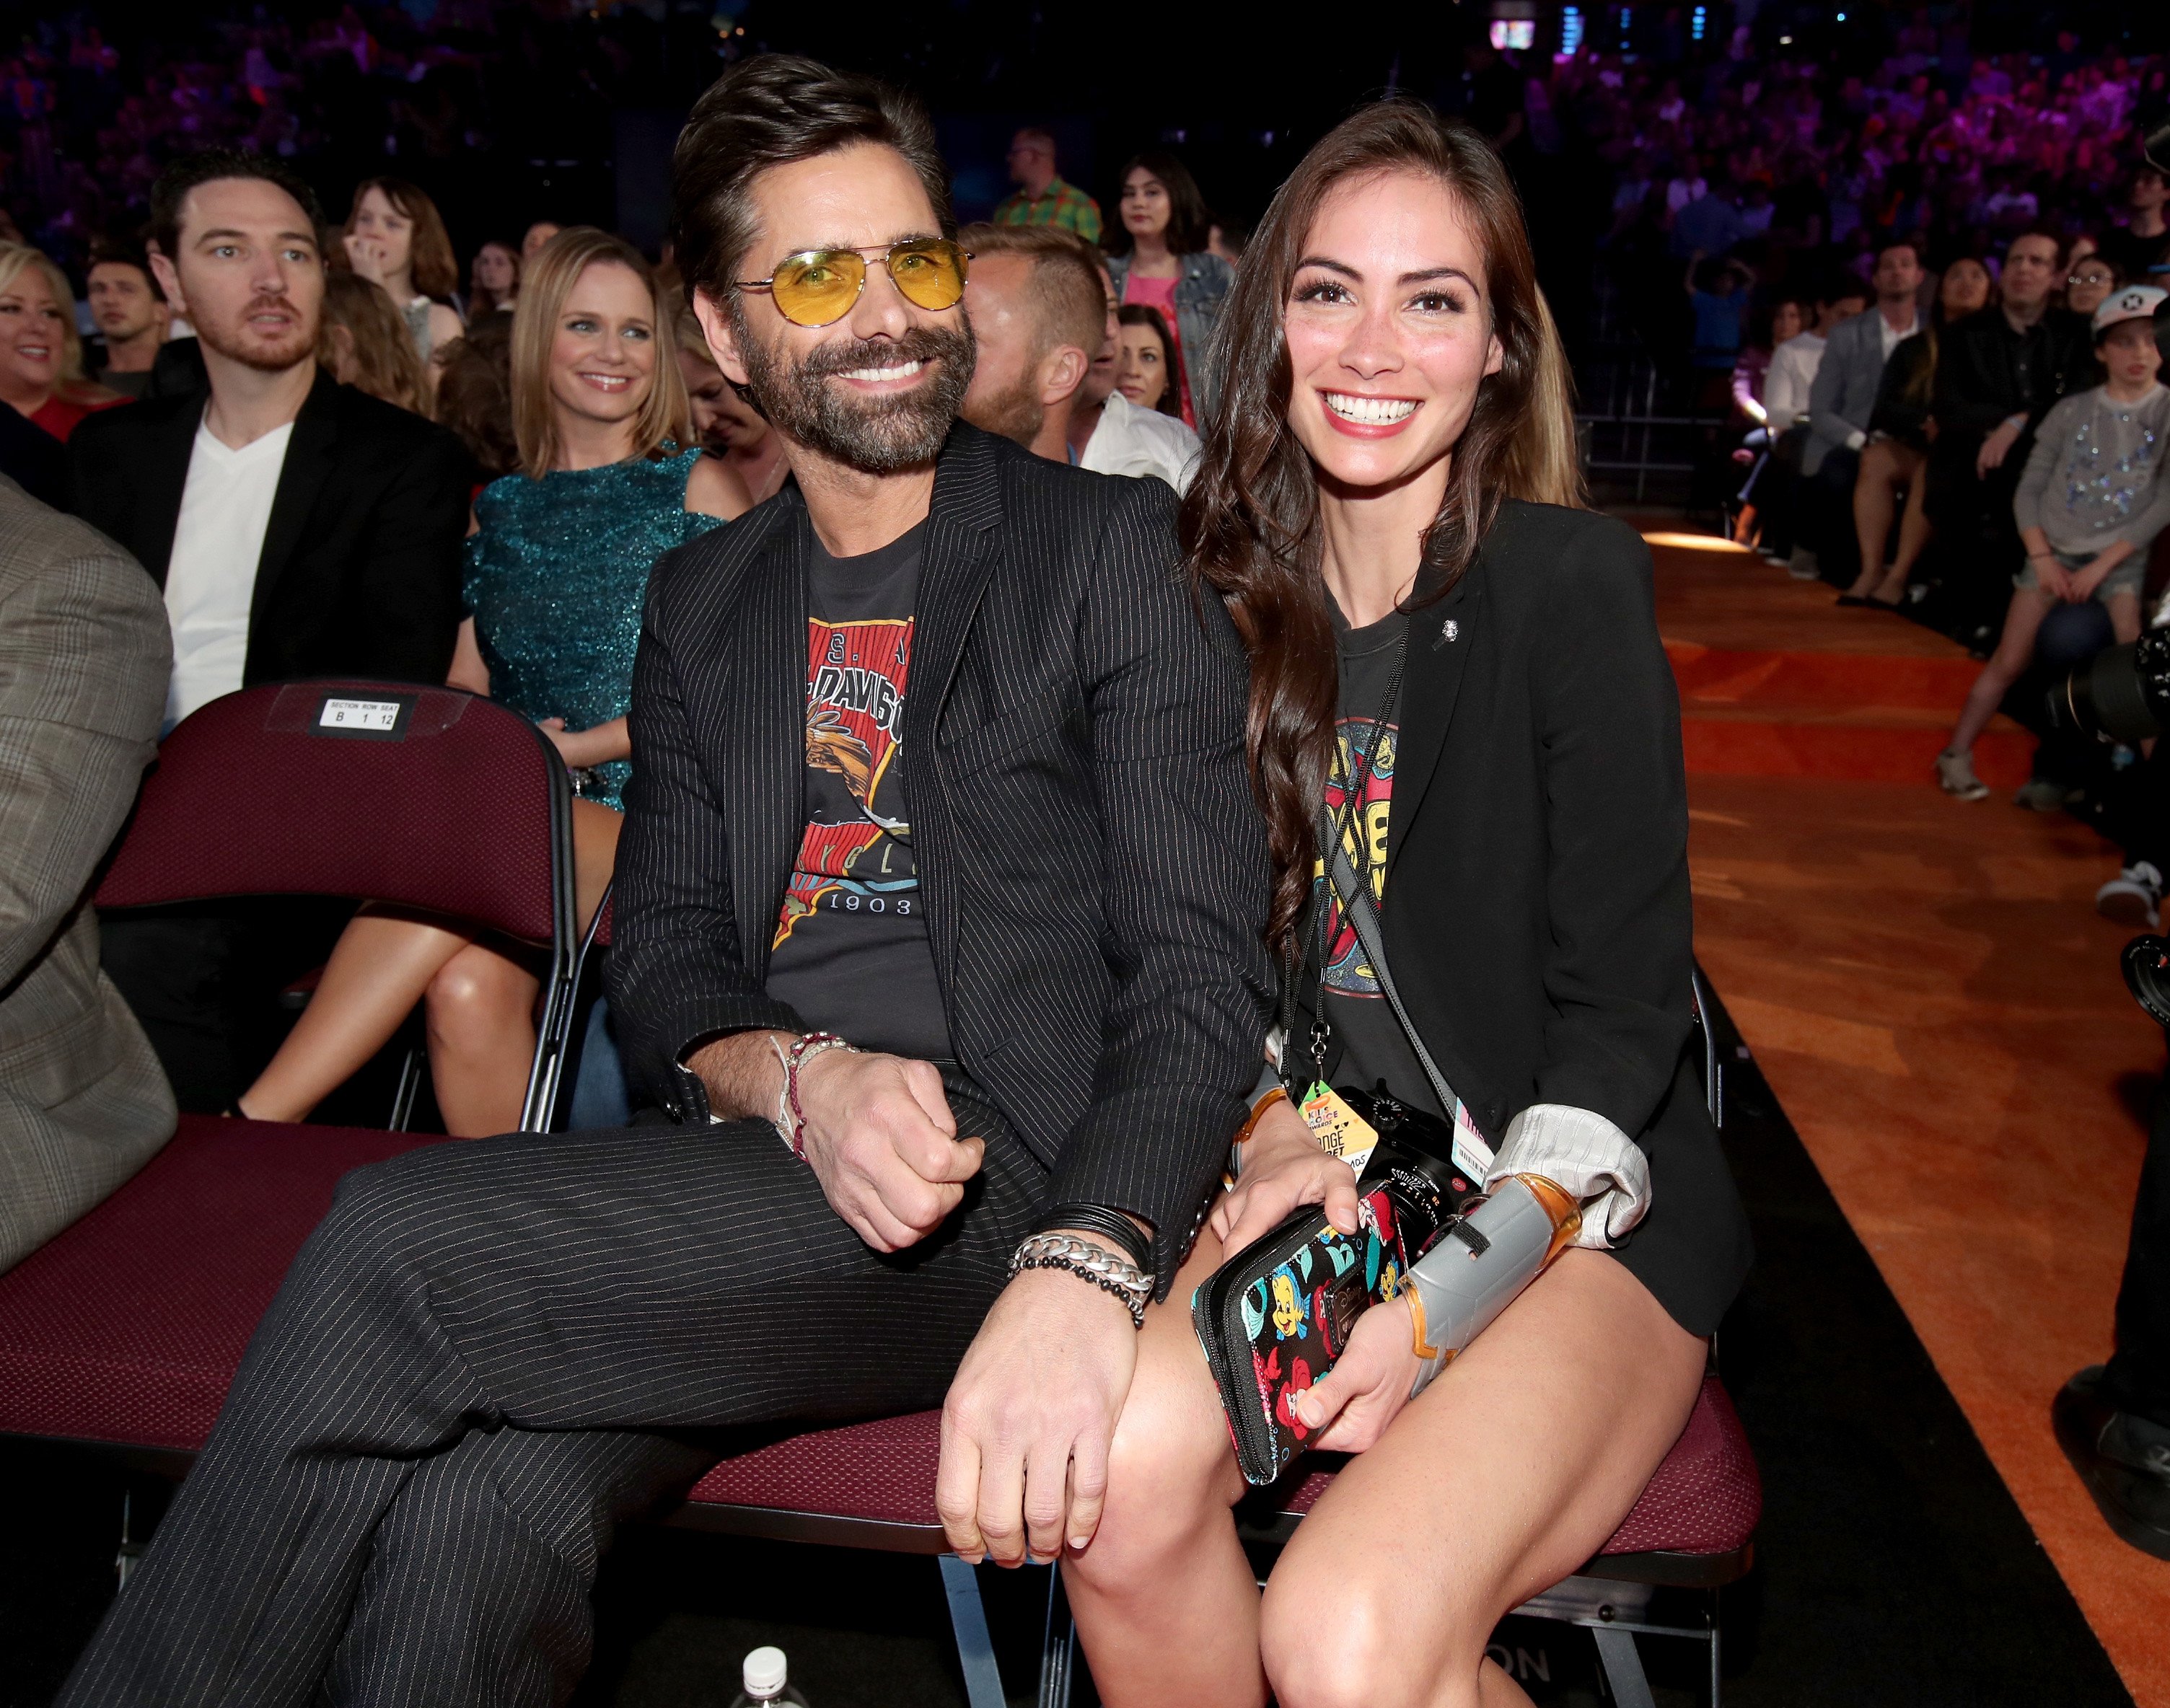  Actor John Stamos (L) and Caitlin McHugh at Nickelodeon's 2017 Kids' Choice Awards at USC Galen Center on March 11, 2017| Photo: Getty Images